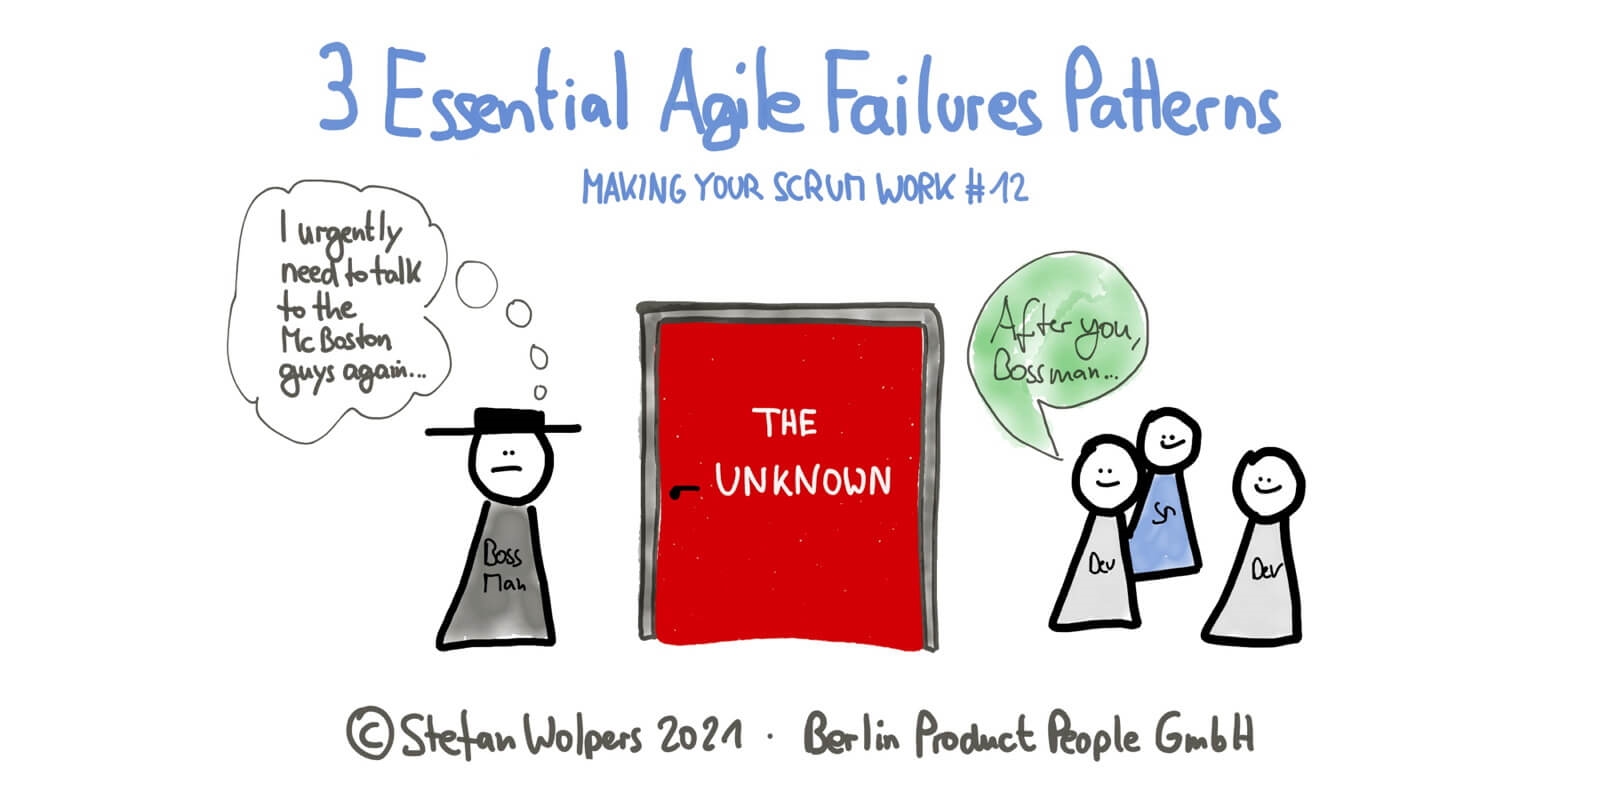 3 Essential Agile Failure Patterns in 7:31 Minutes—Making Your Scrum Work